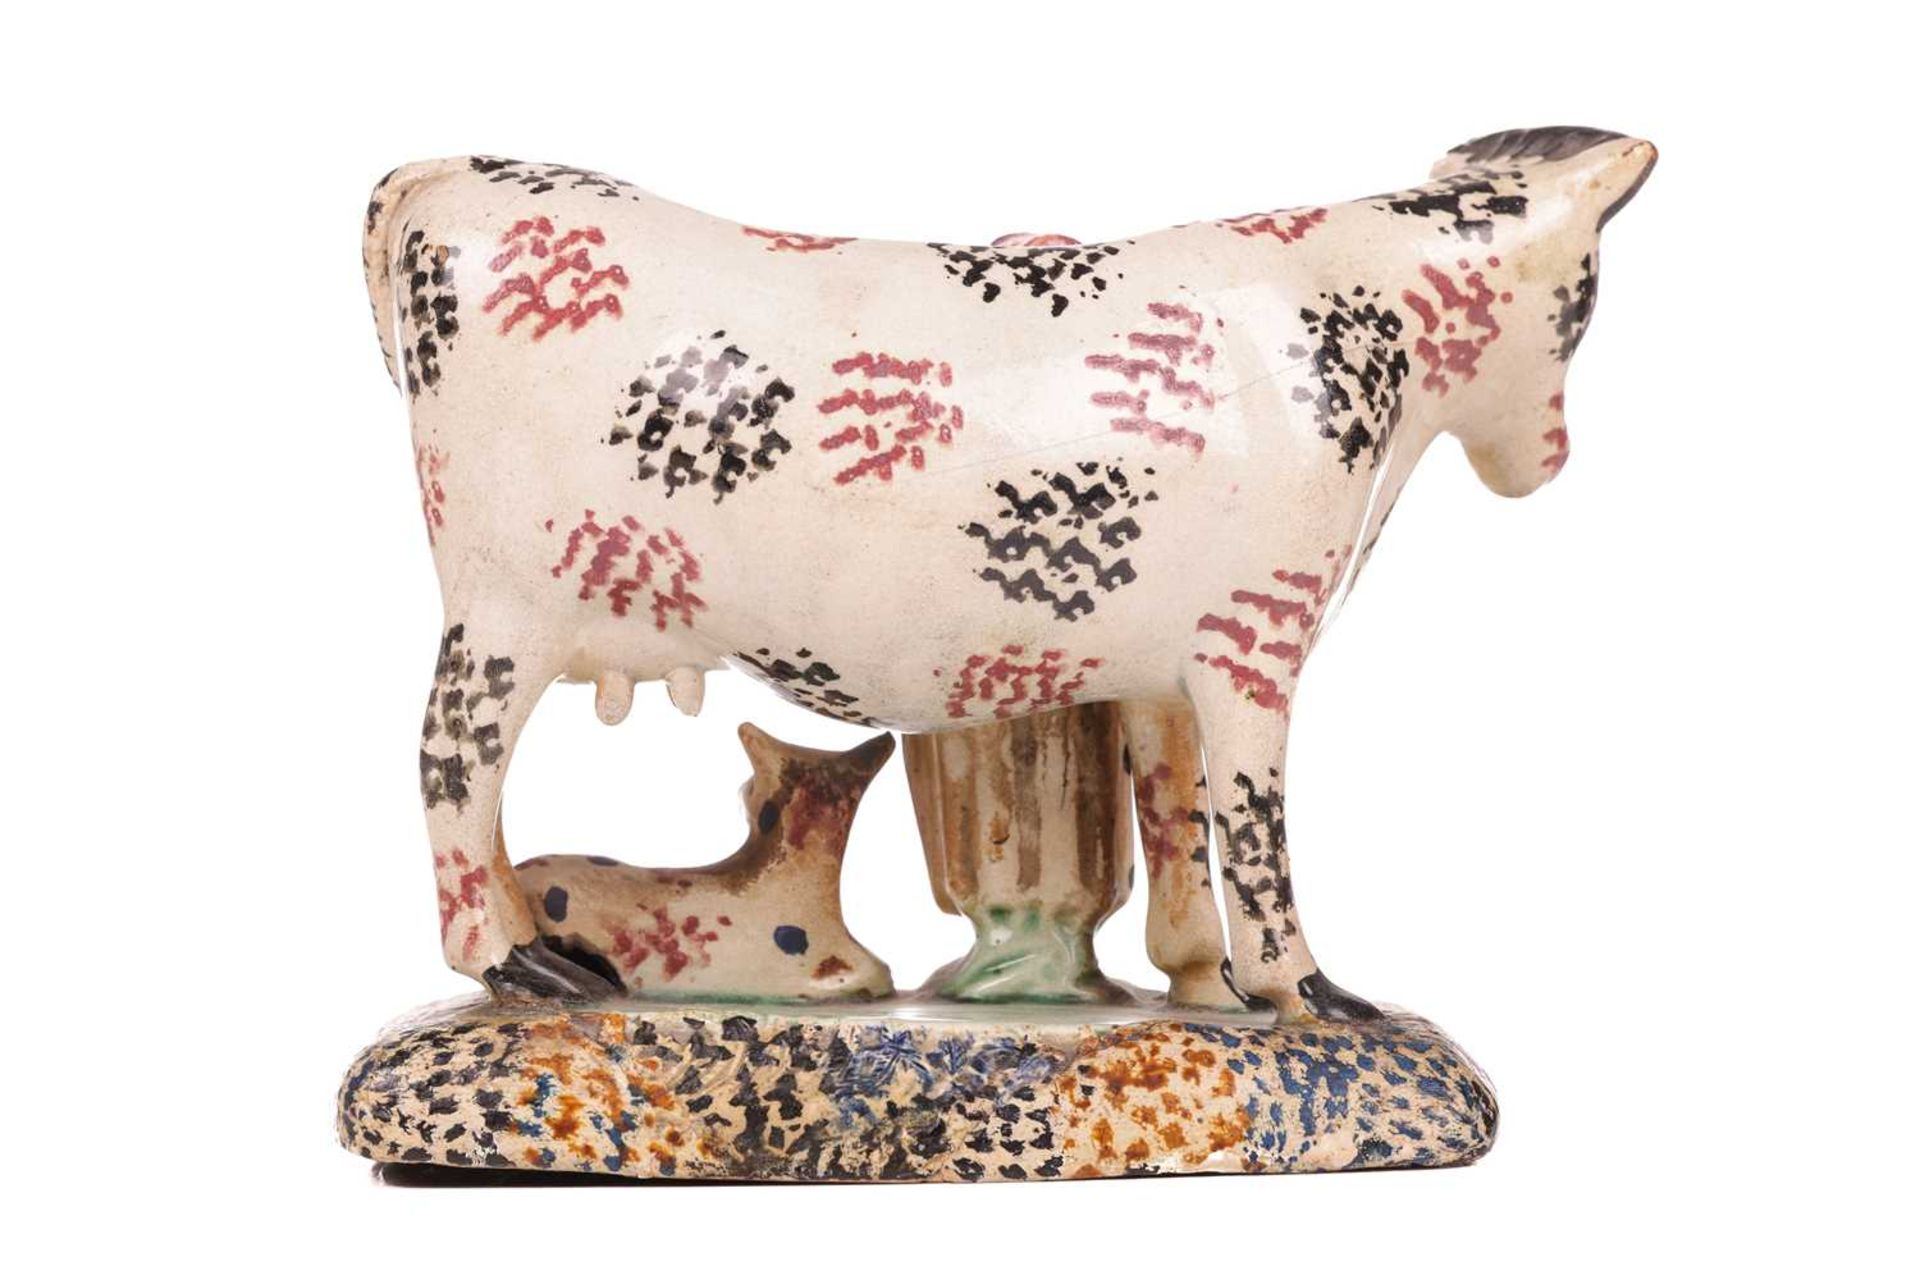 An early 19th-century Prattware ceramic cow, milkmaid and calf figure, circa 1810 with sponged decor - Image 2 of 7